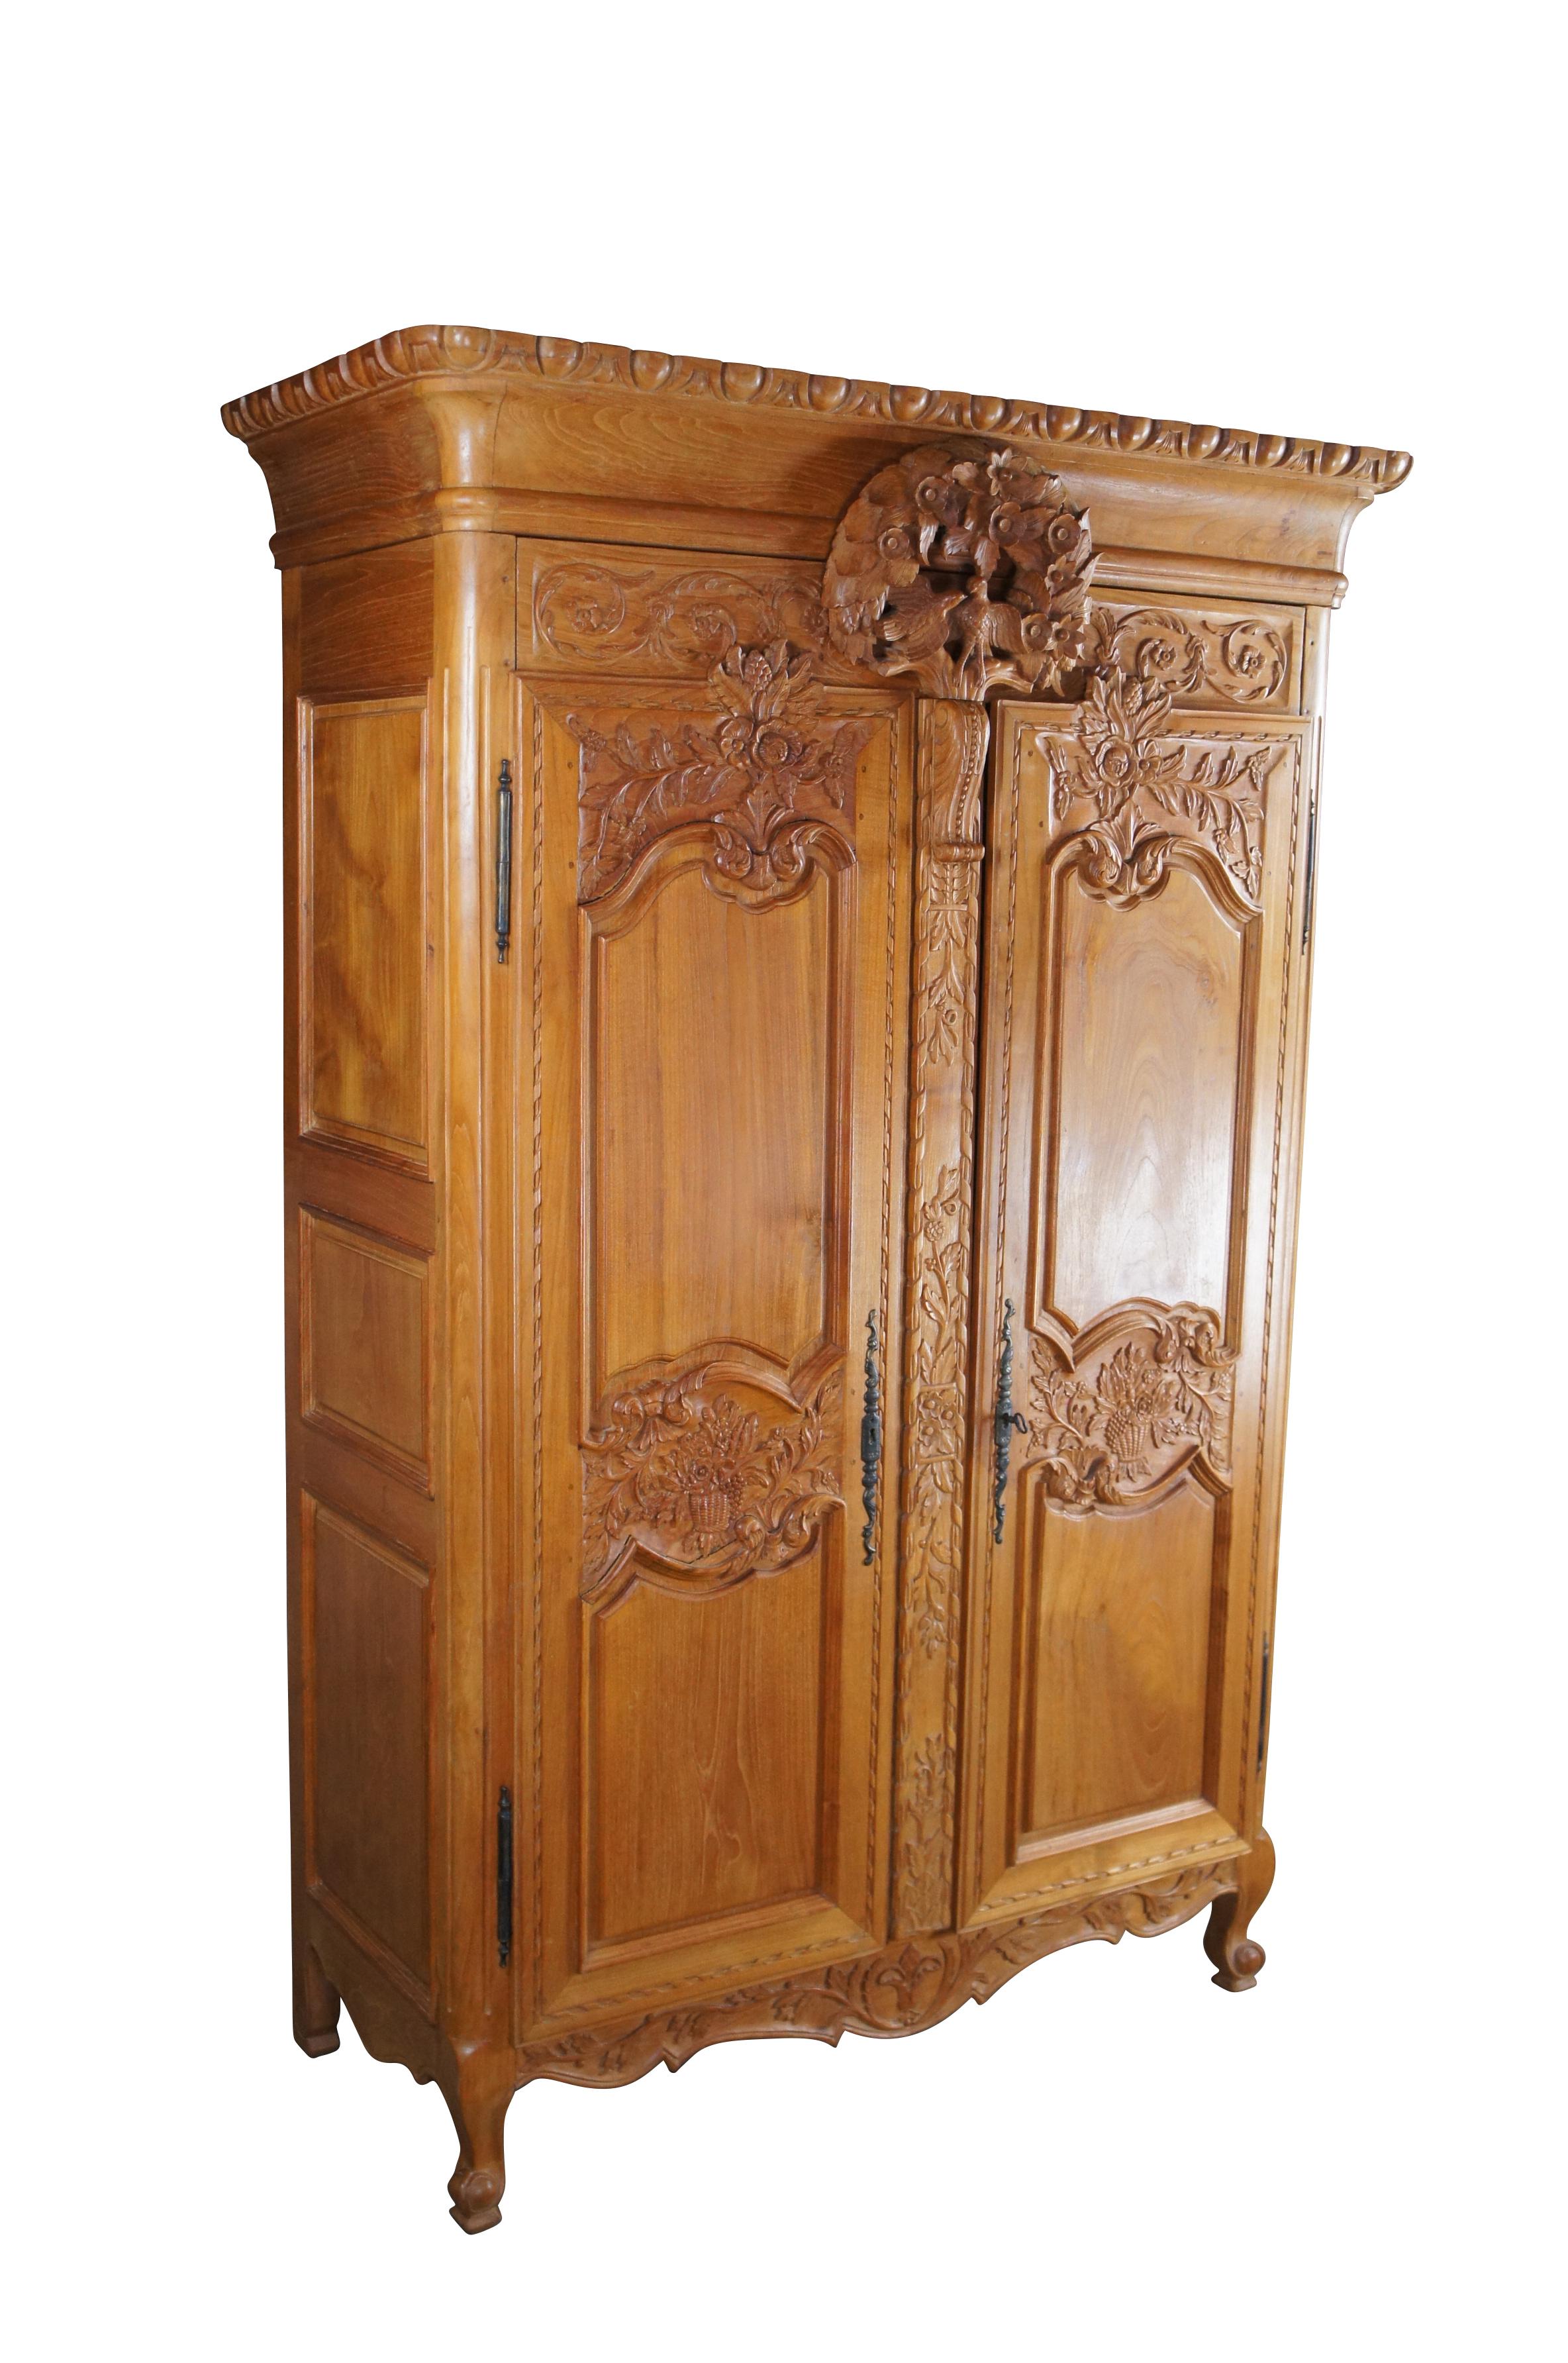 Antique French Louis XV knockdown wedding armoire / wardrobe / linen press.  Made of mahogany featuring baroque styling with carved egg and dart crown over a floral and bird theme wreath and paneled doors with foliage and fruit basket